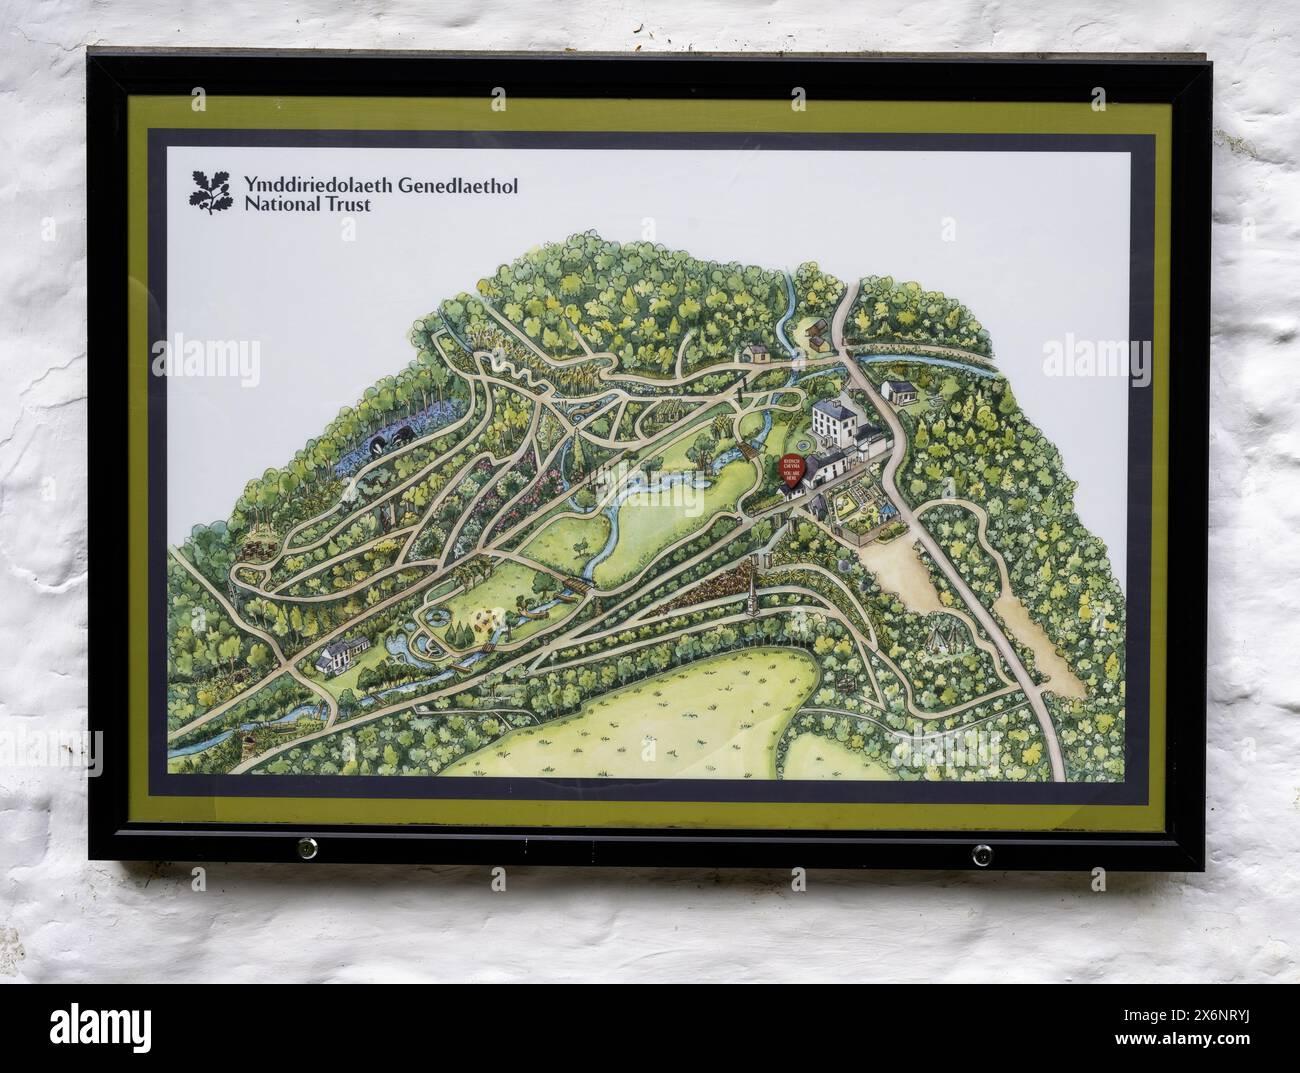 Colby Woodland Garden, Pembrokeshire, South Wales, Wales, UK - tourist / visitor information board Stock Photo